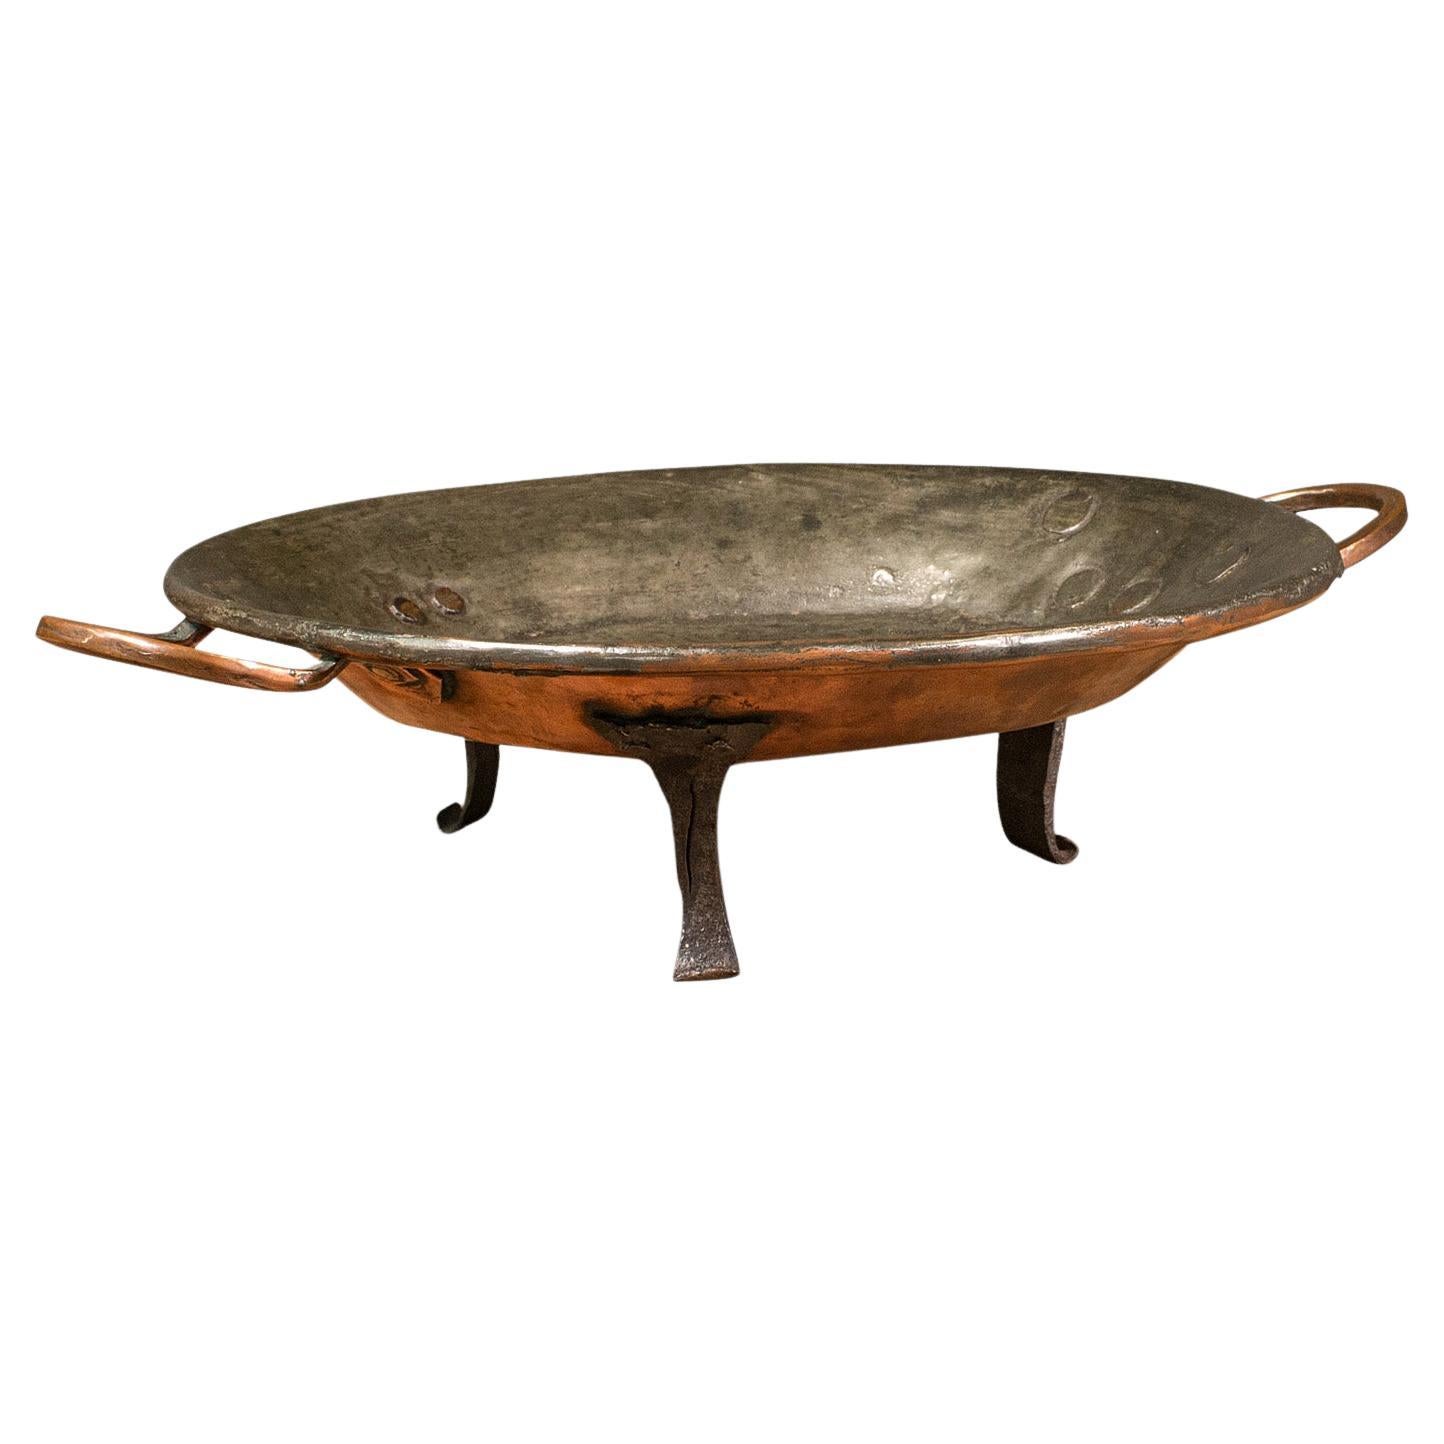 Antique Cooking Dish, English, Copper, Decorative Tray, Historic, Georgian, 1750 For Sale